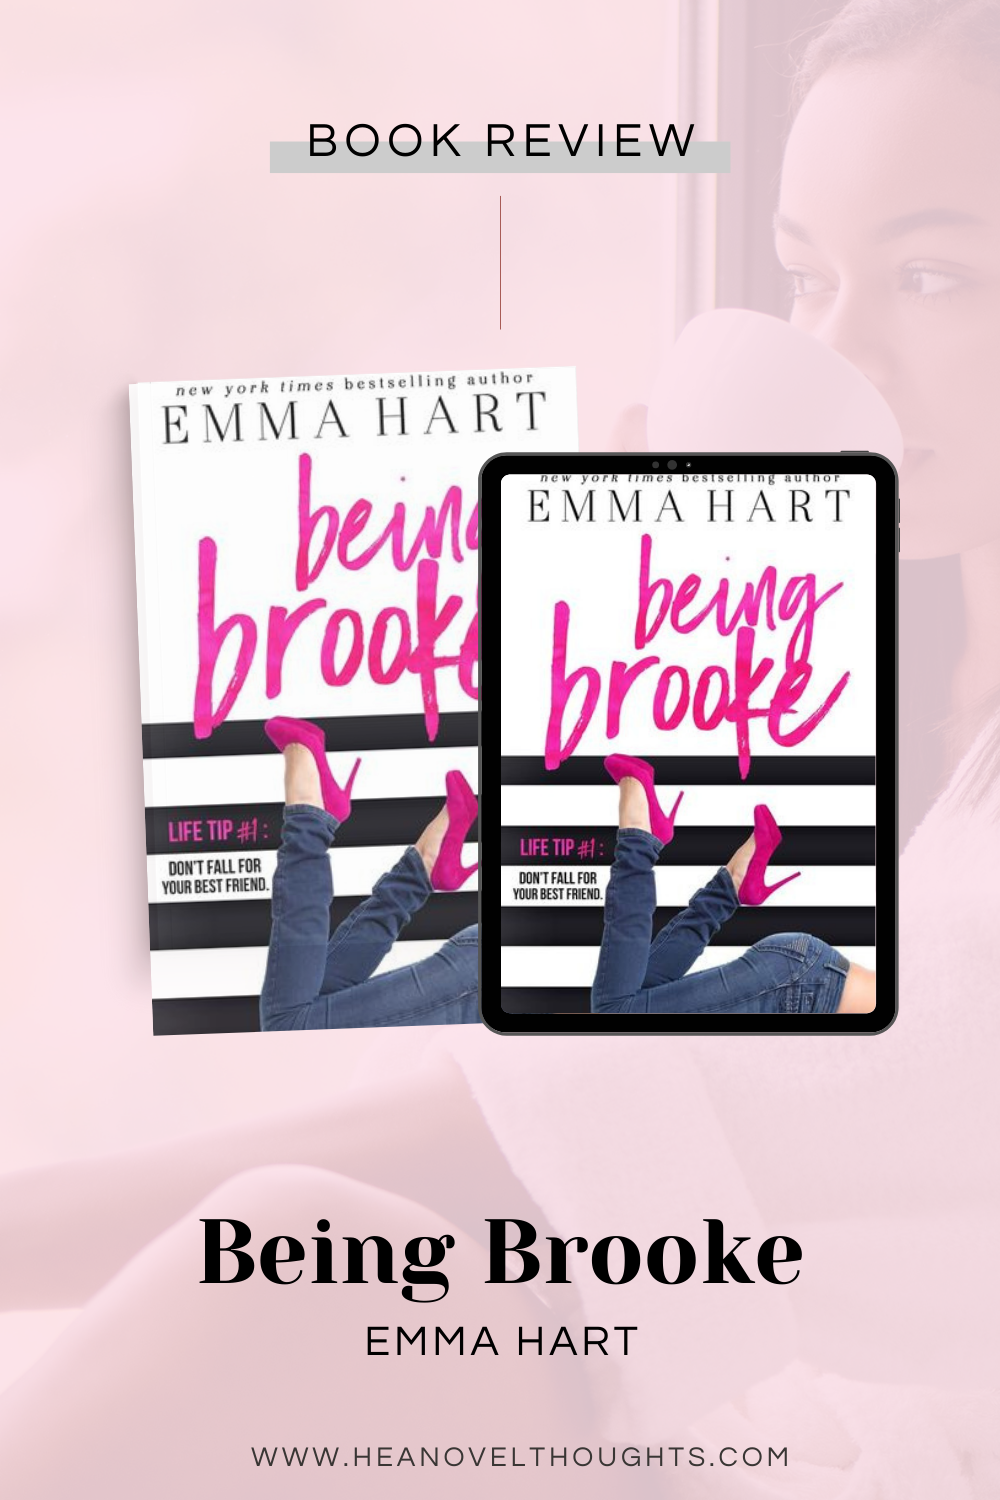 Being Brooke by Emma Hart